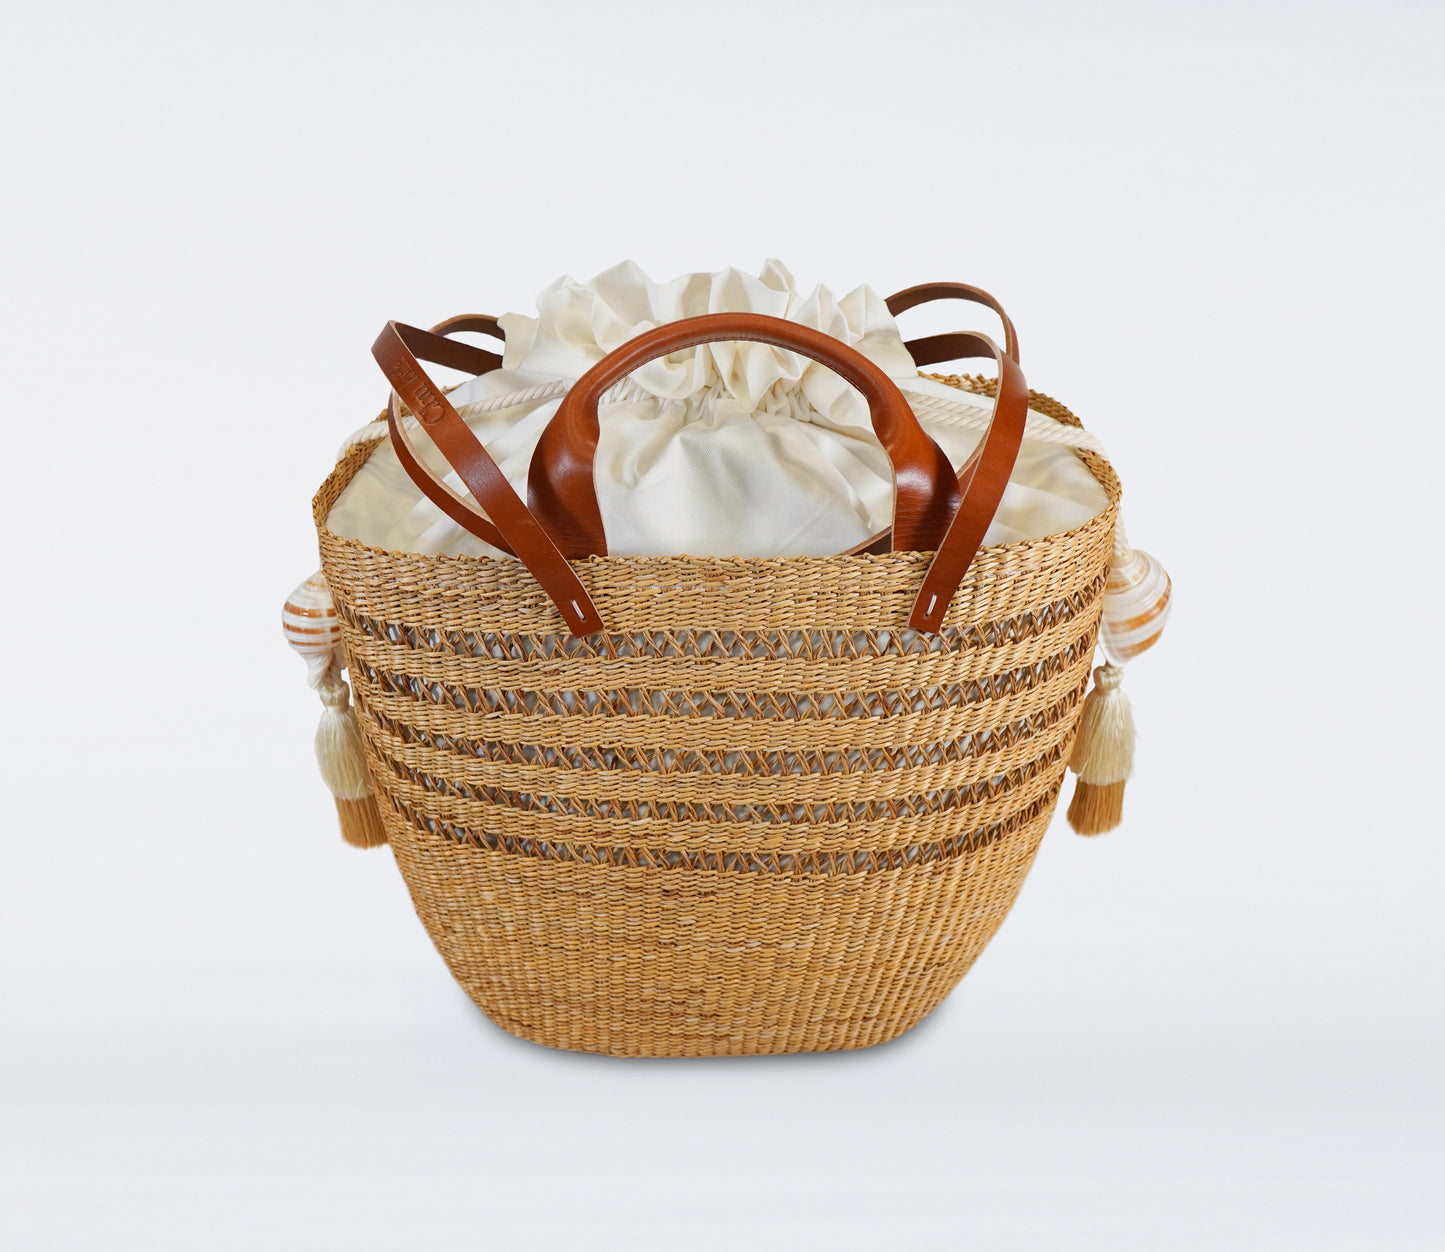 Large camel basket in straw, camel recycled leather handles, cotton bag and natural shells.